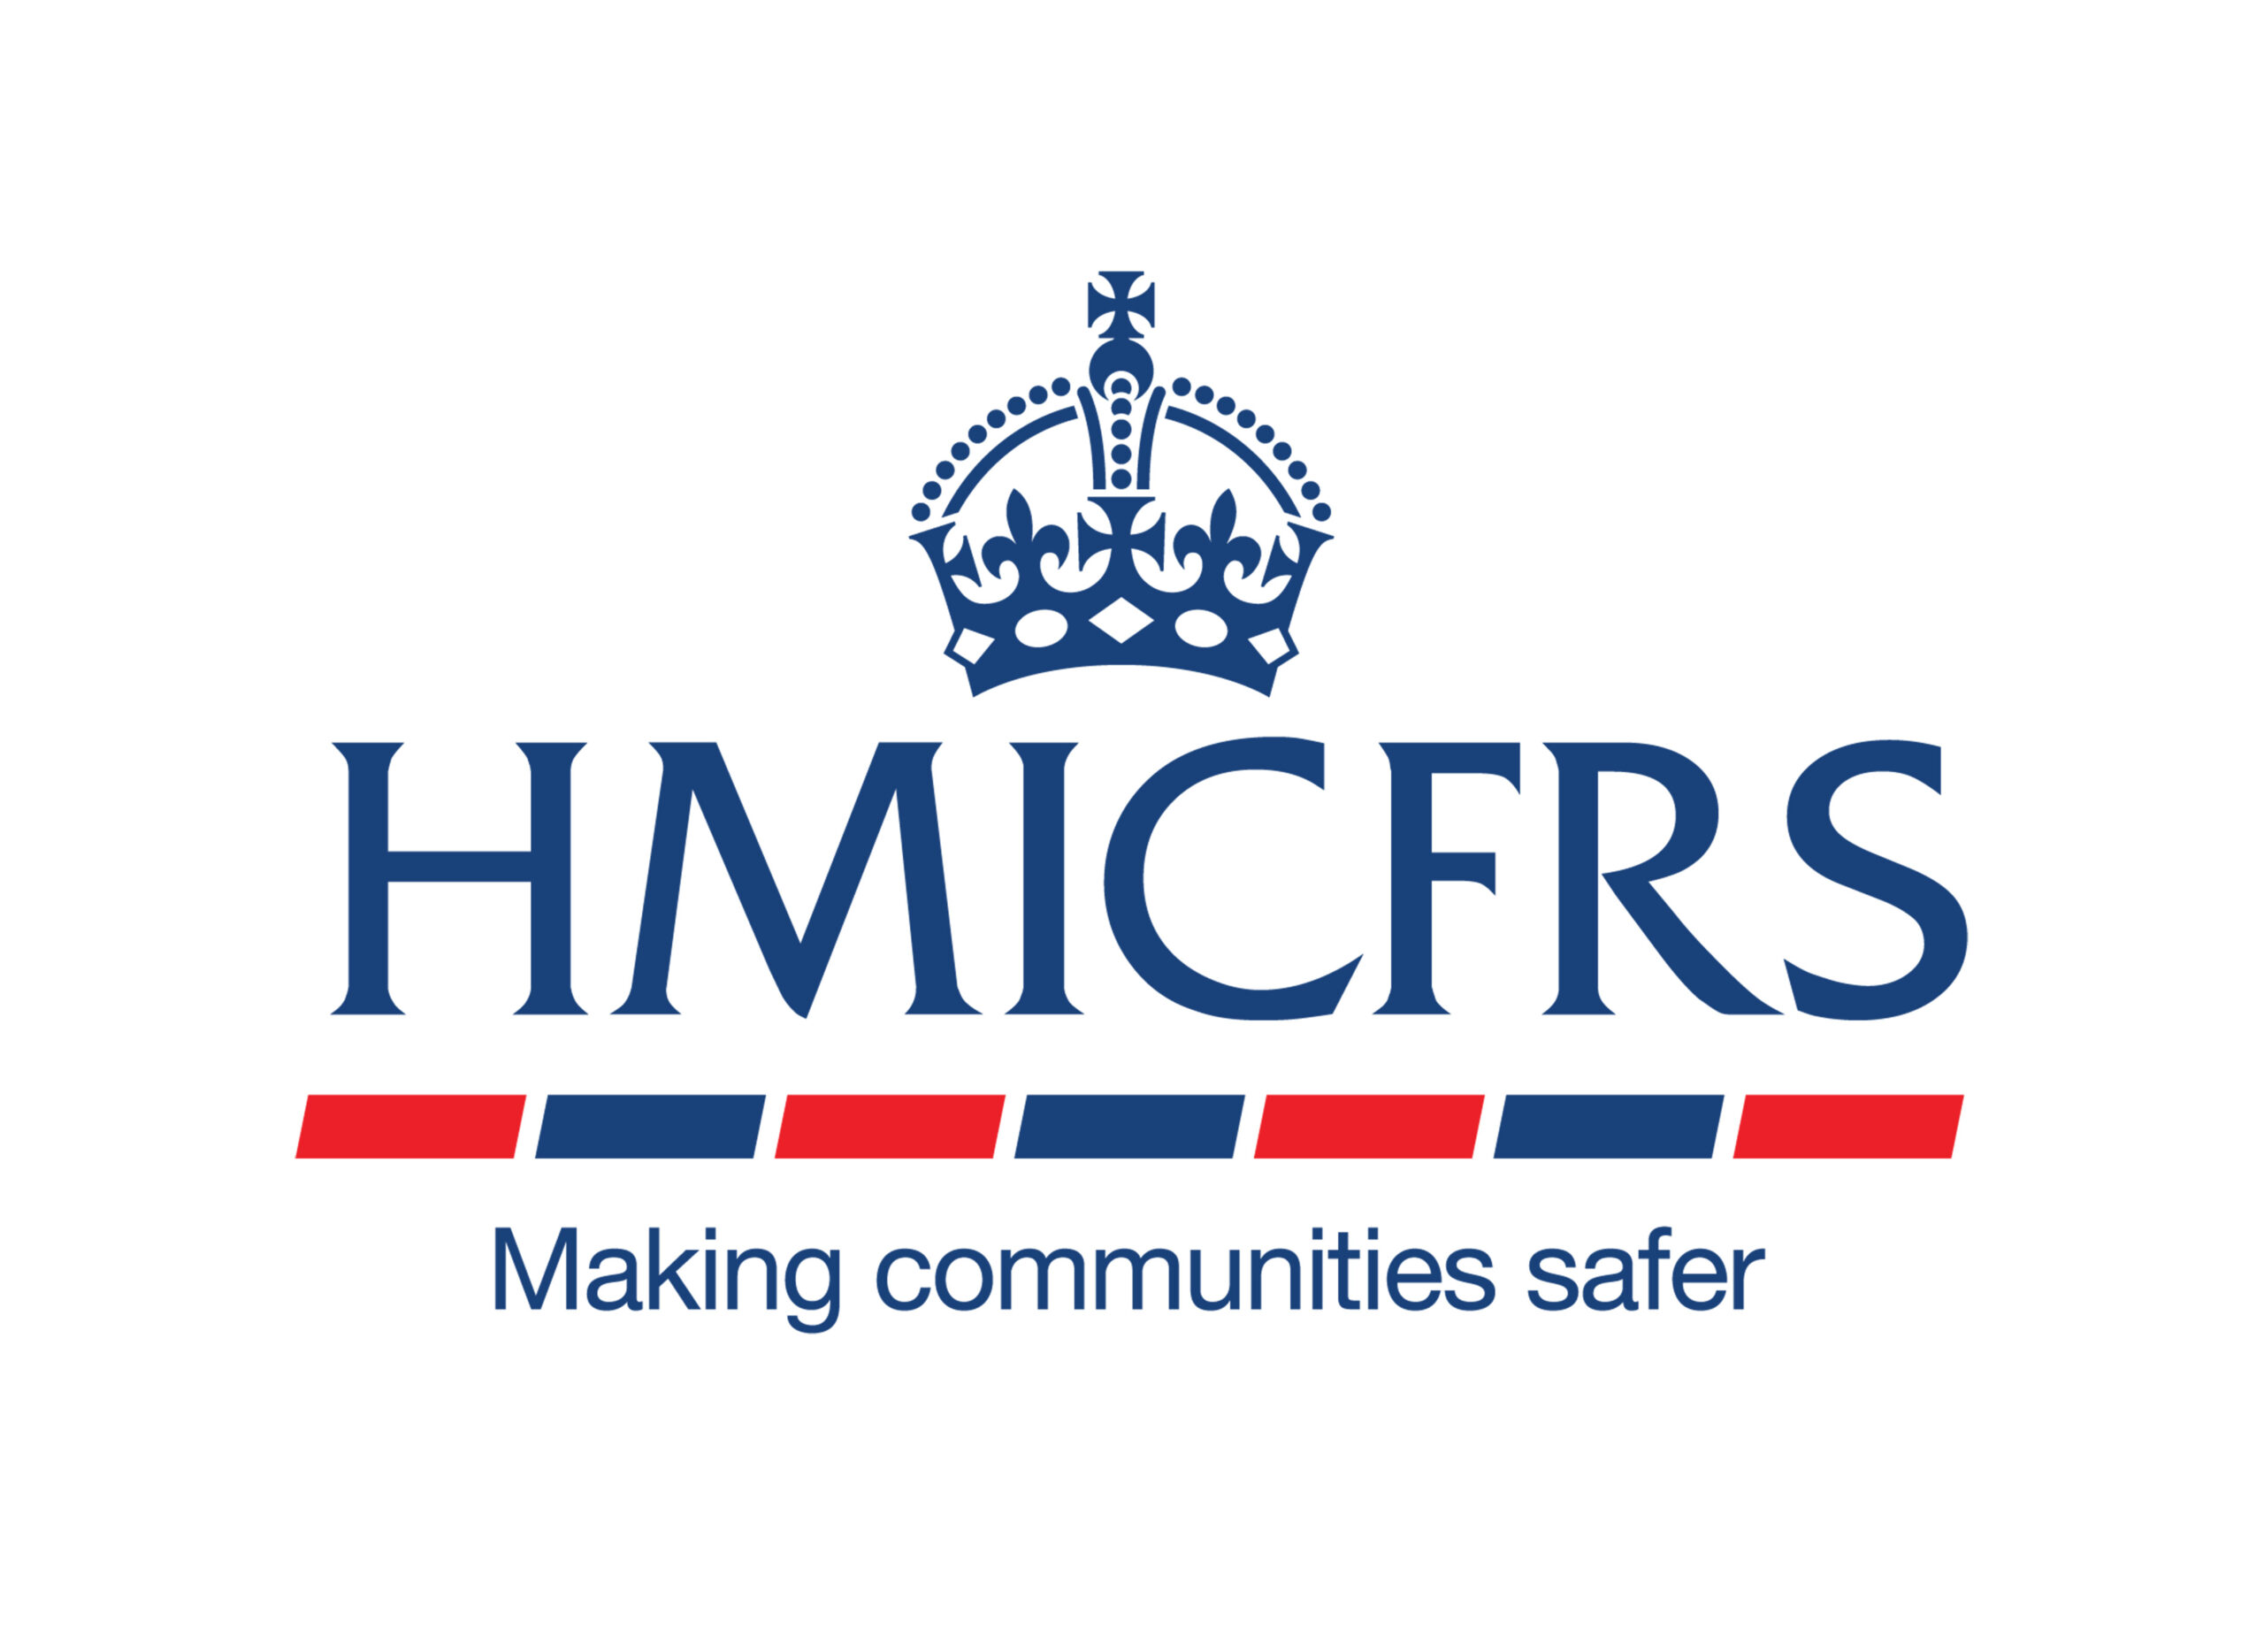 The HMICFRS logo. This depicts a crown with the word HMICFRS and Making communities safer underneath.